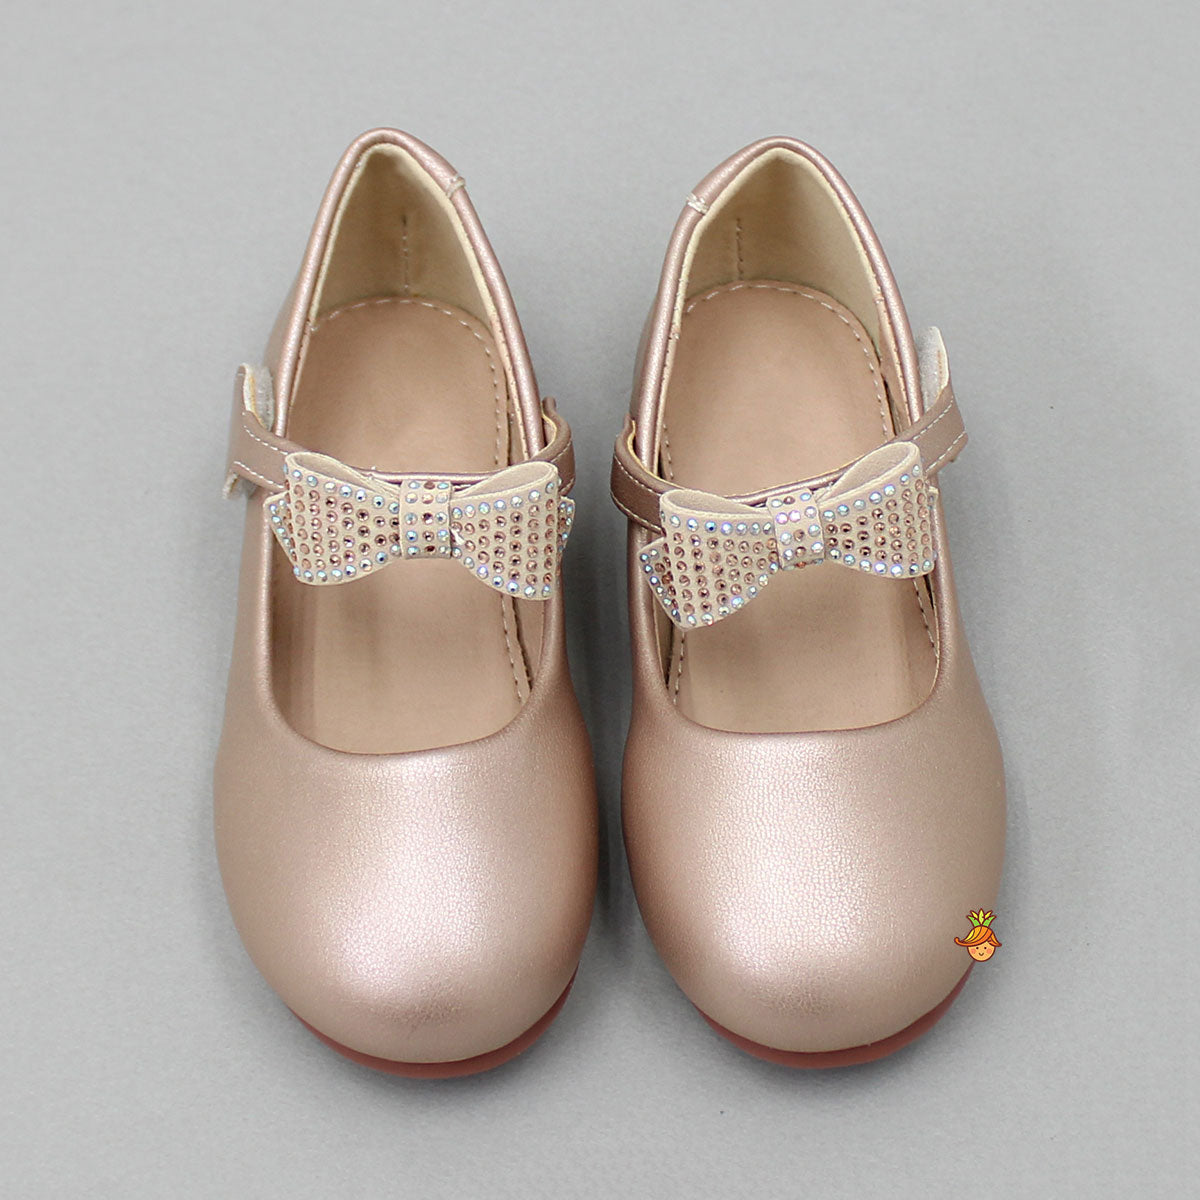 Tiny Bow Adorned Beige Shoes